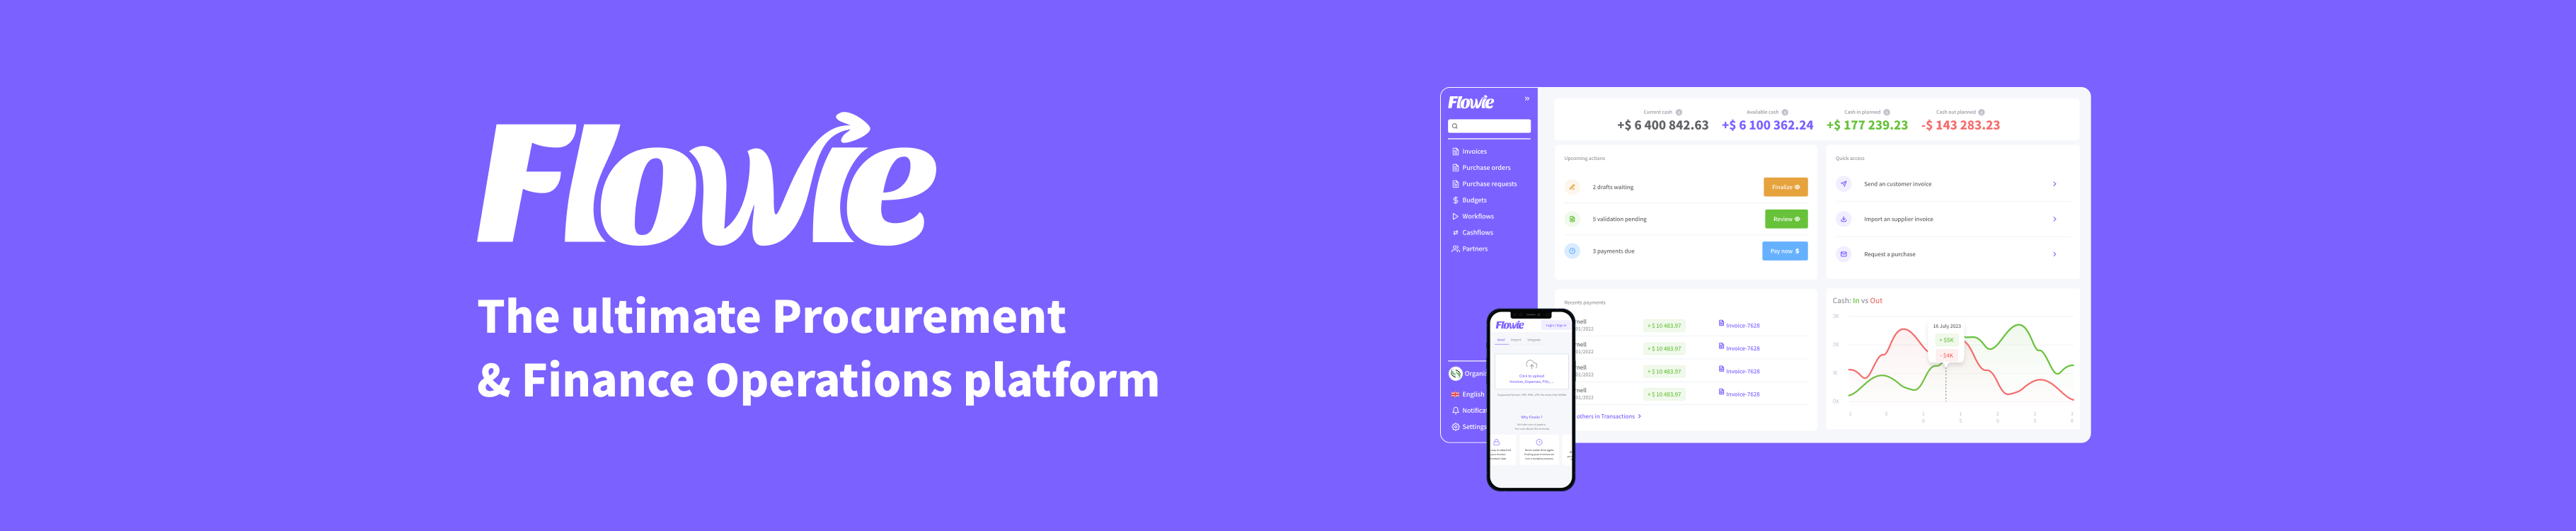 Review Flowie: The ultimate Procurement and Finance Operations platform - Appvizer